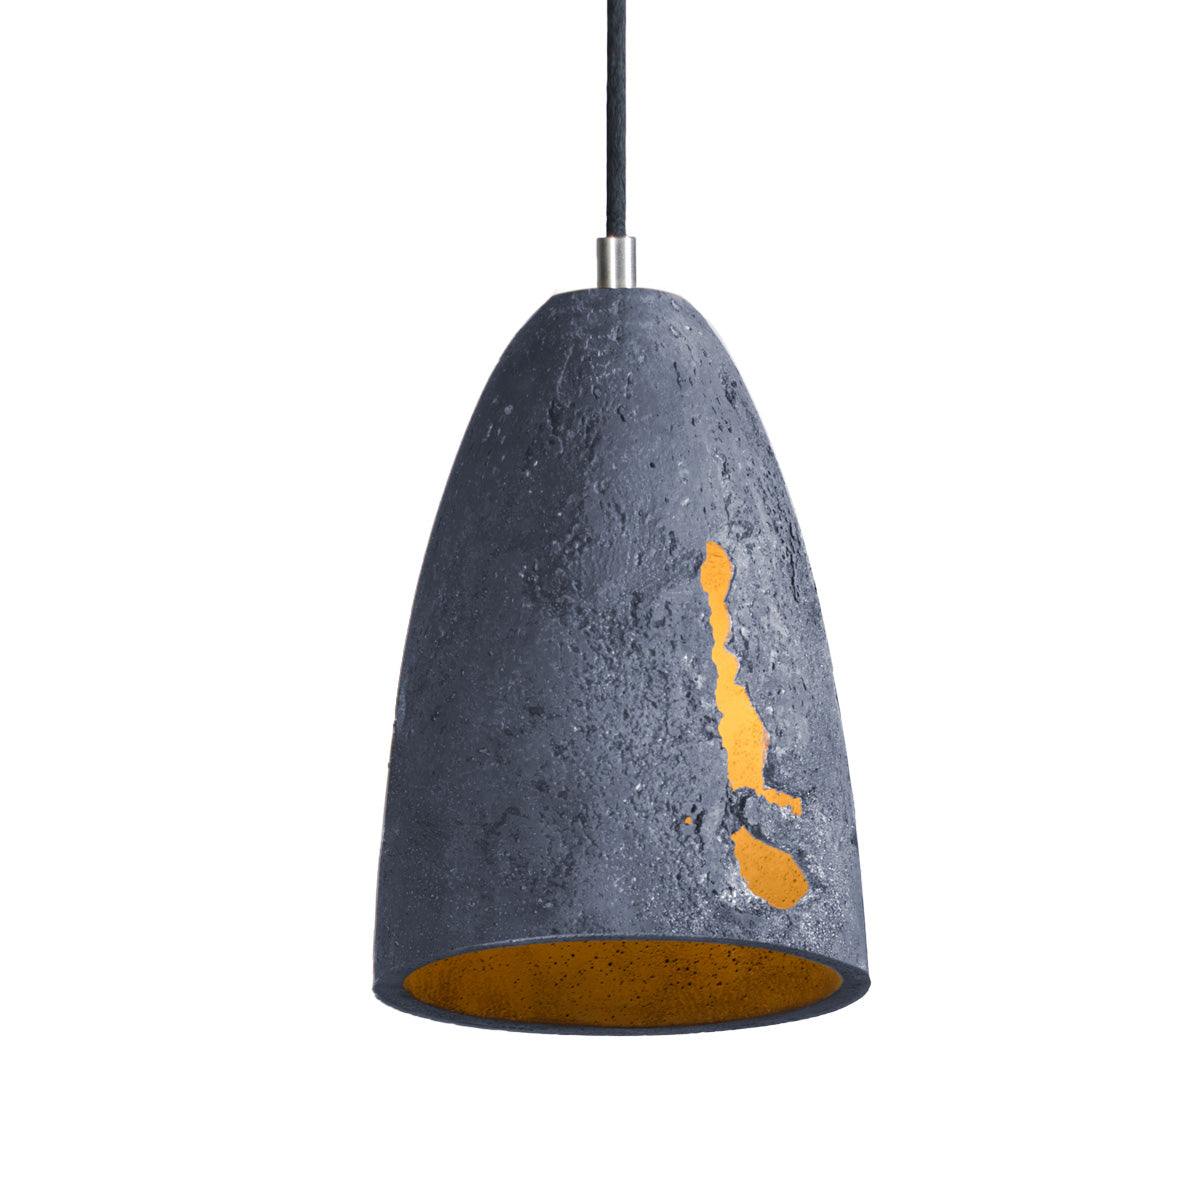 Febe Volcano is a lamp with a very harsh appearance. It will fit into every loft or industrial room, giving it a cozy glow. The scratch effect gives a factory accent. Made of concrete manually, which means that each copy is unique and there may be small differences in the invoice and color. At the top there is a steel handle that distinguishes this lighting.